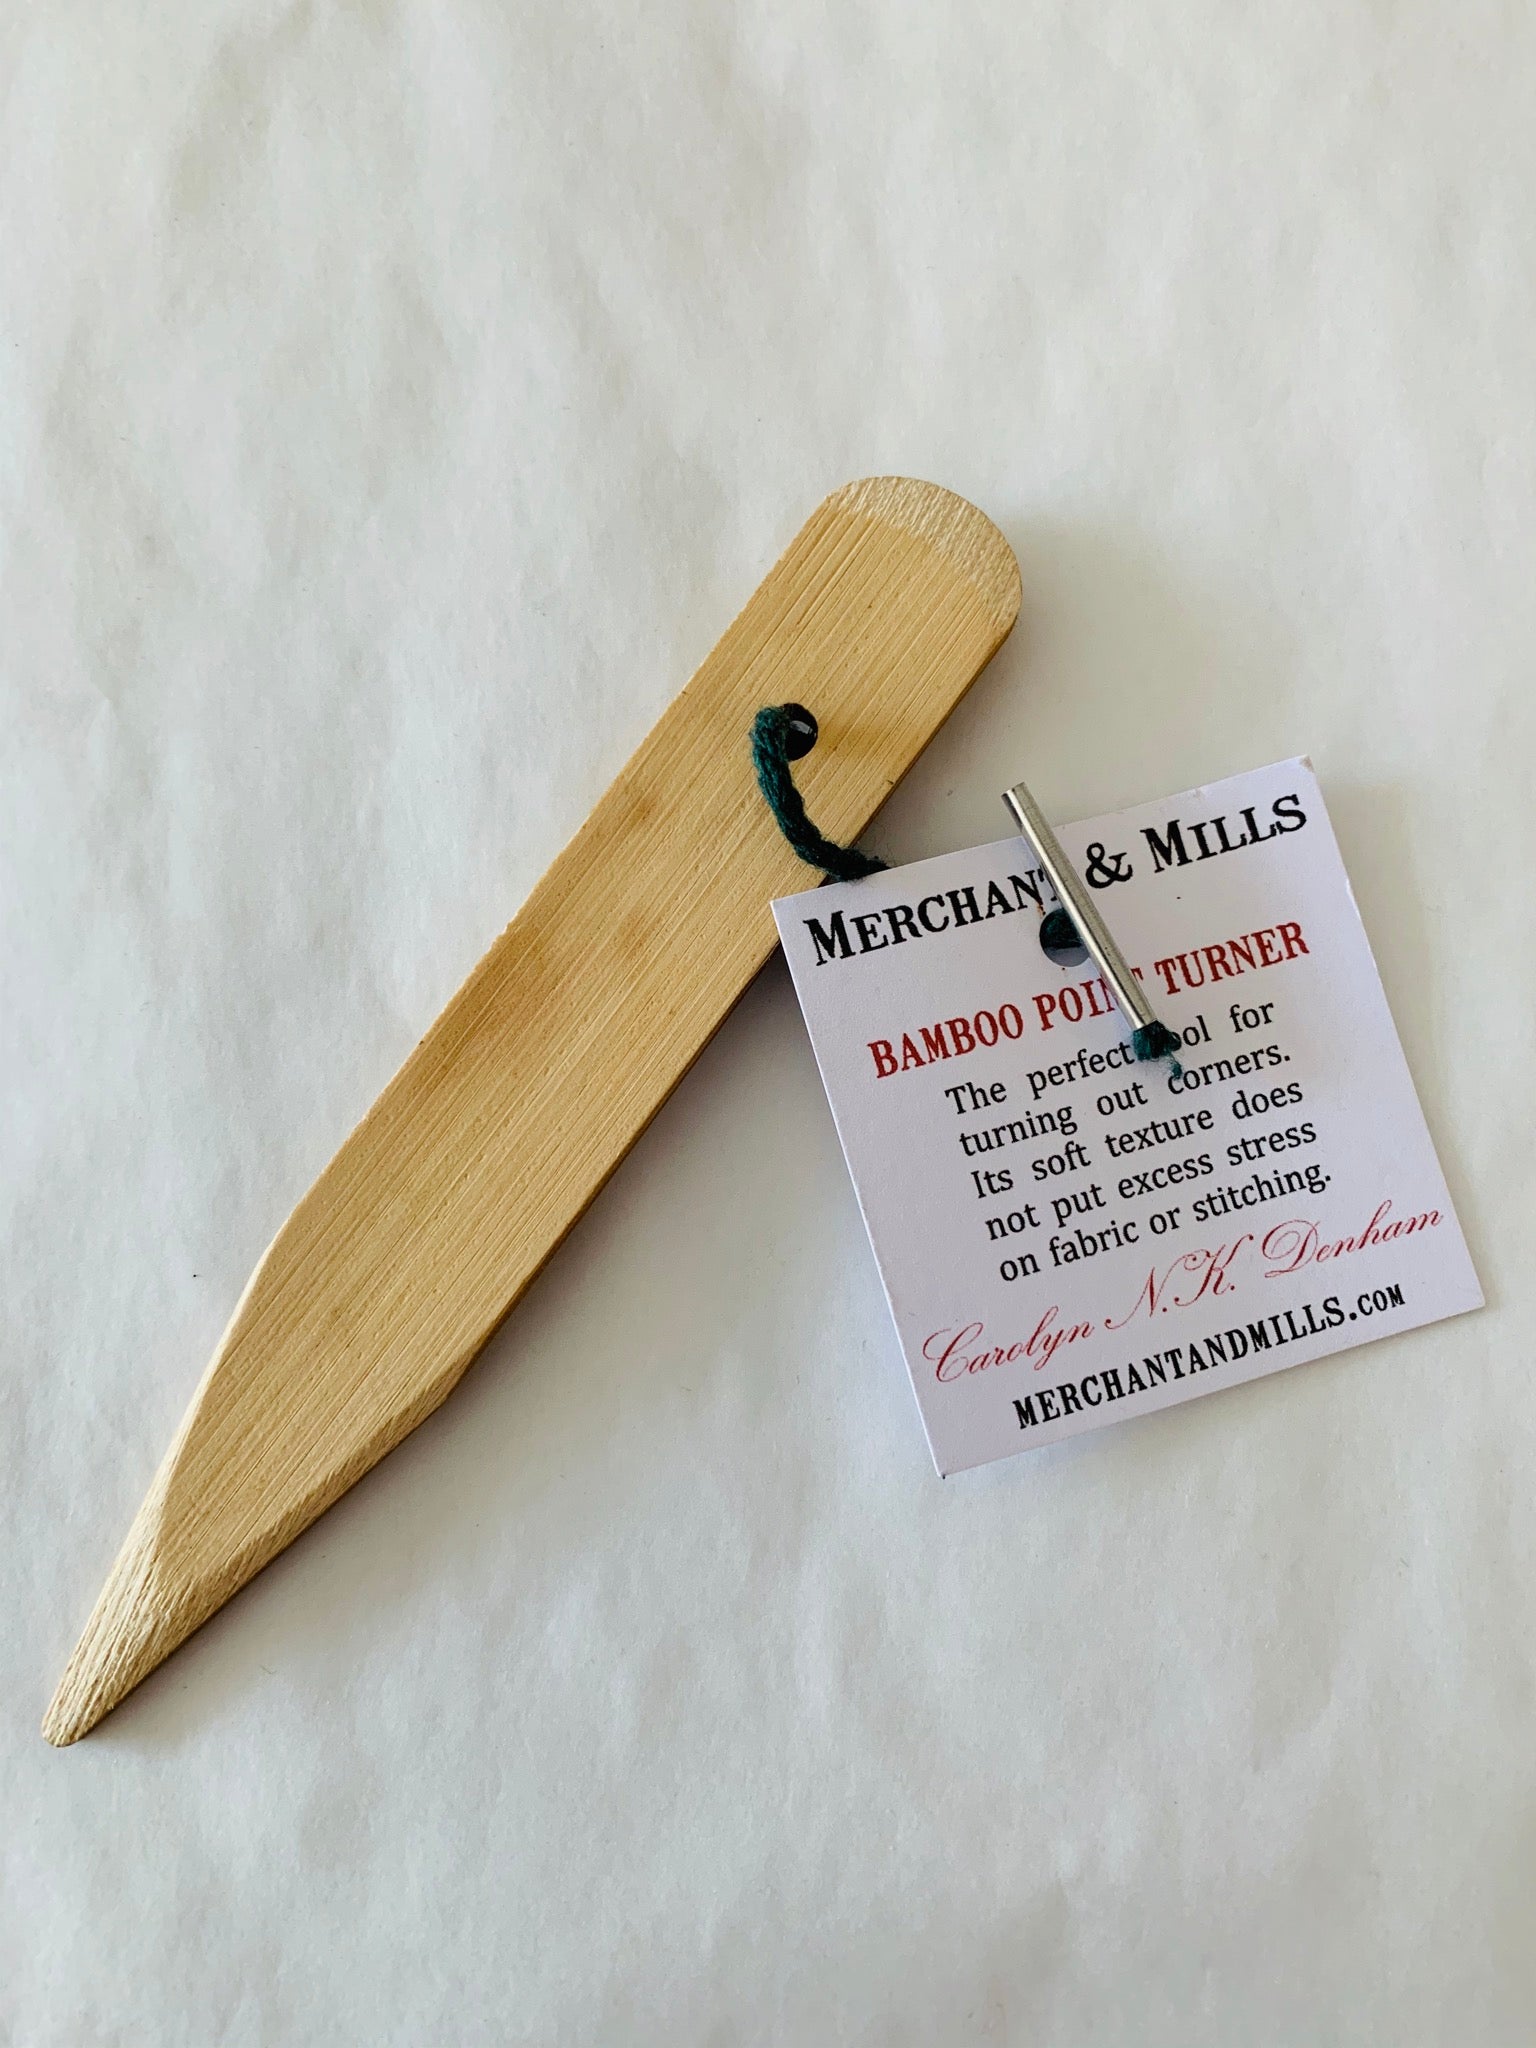 Merchant and Mills Bamboo Point Turner